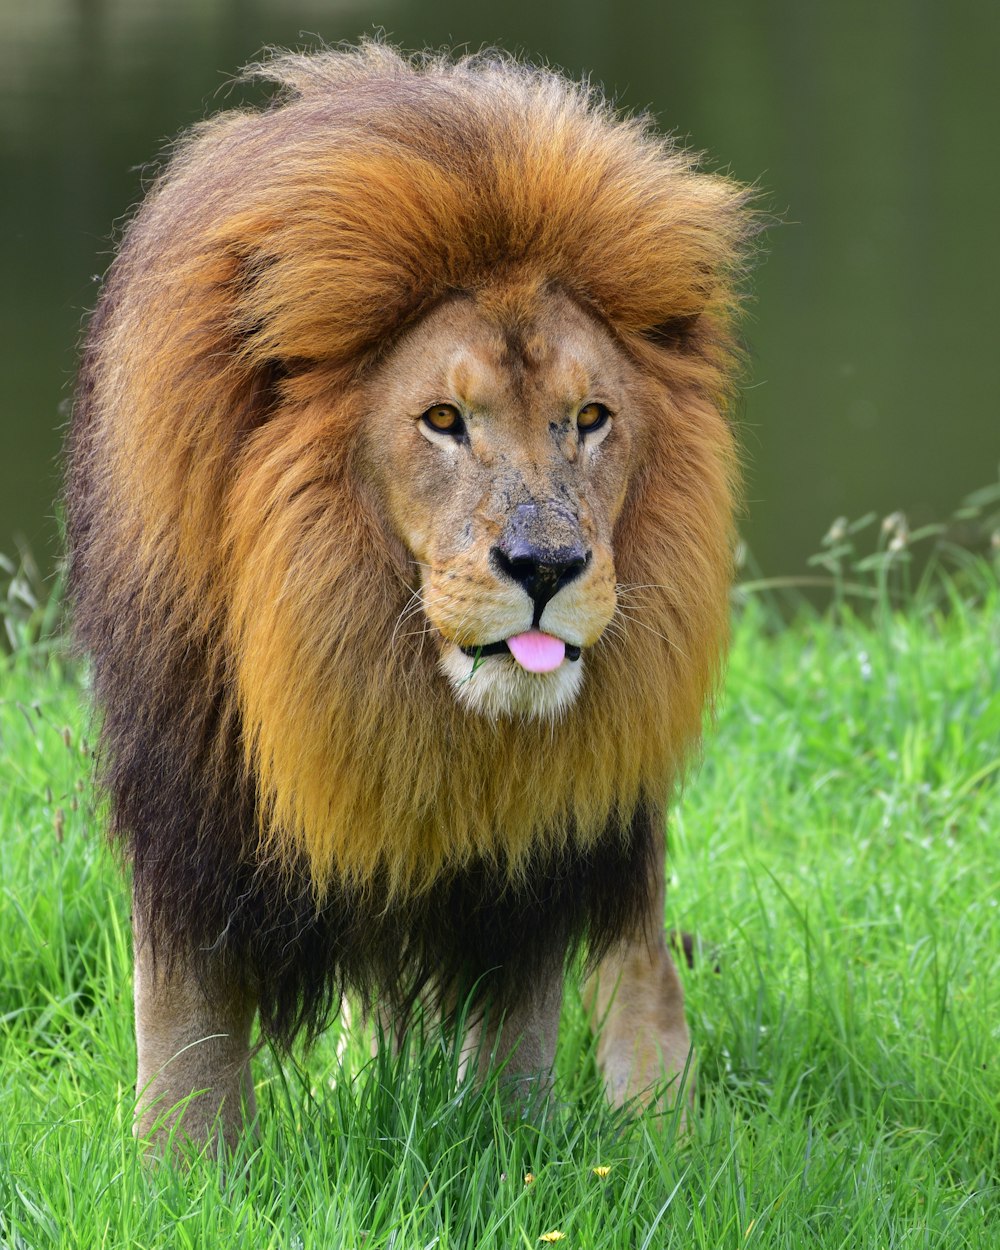 lion on green grass field during daytime